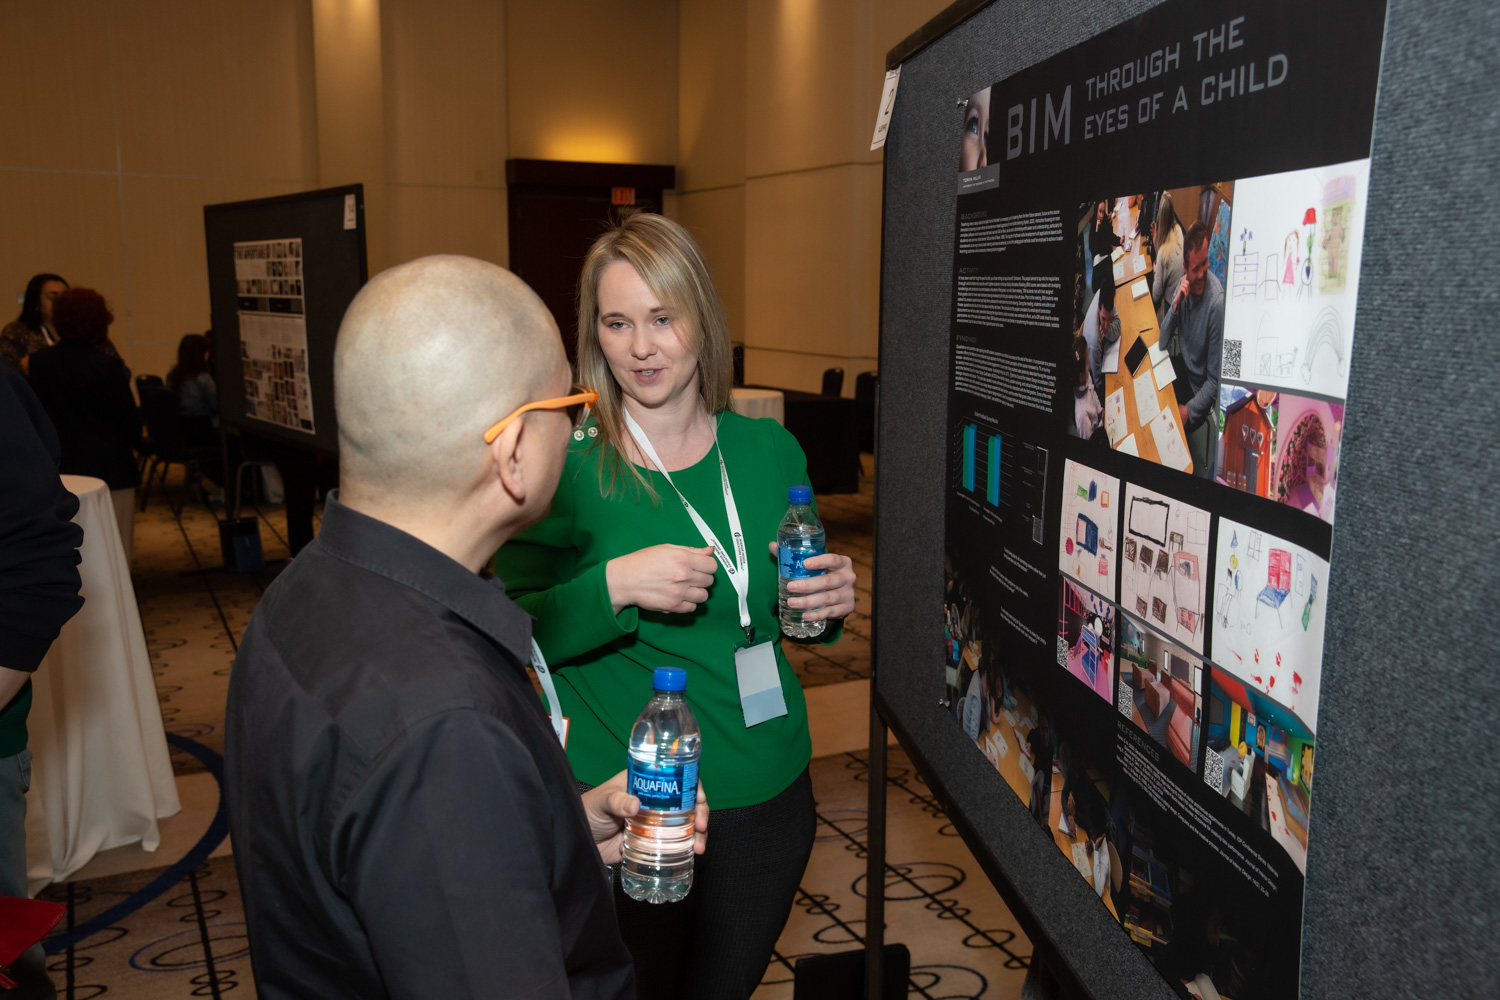 Conference-goers conversing in front of poster.